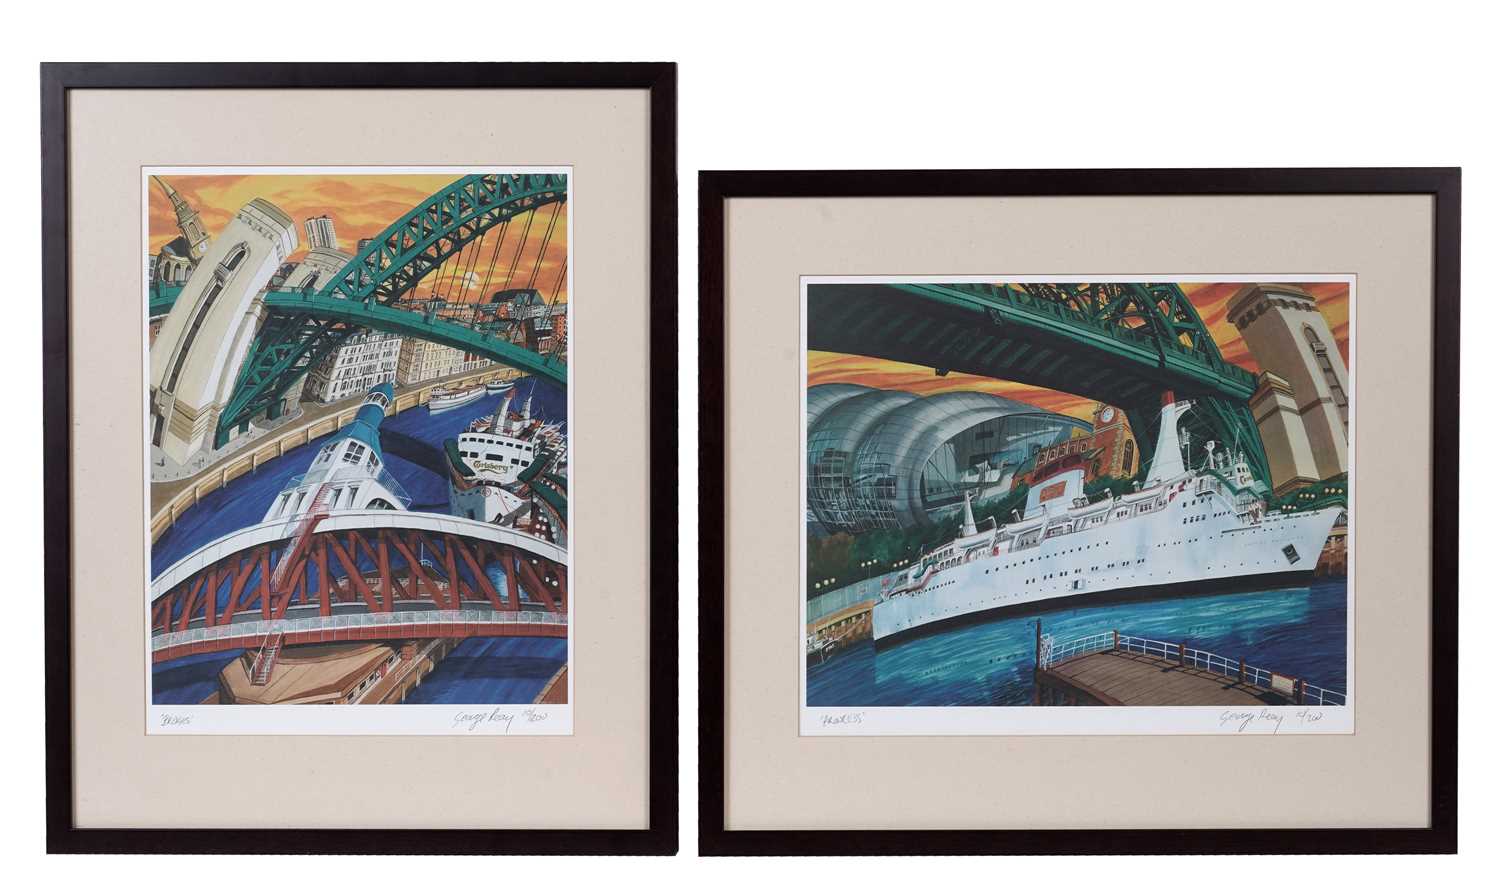 After George Reay - Bridges, Quayside, Princess: three views of Newcastle | limited edition prints - Image 12 of 12